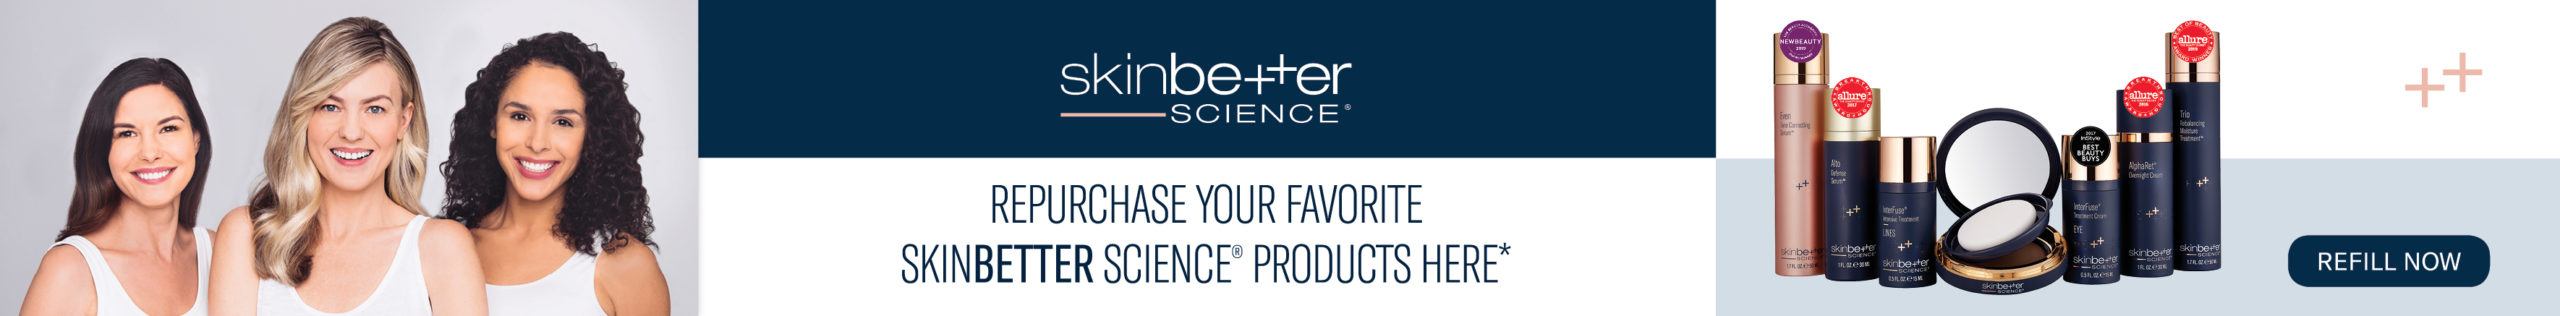 Repurchase your skinbetter products here